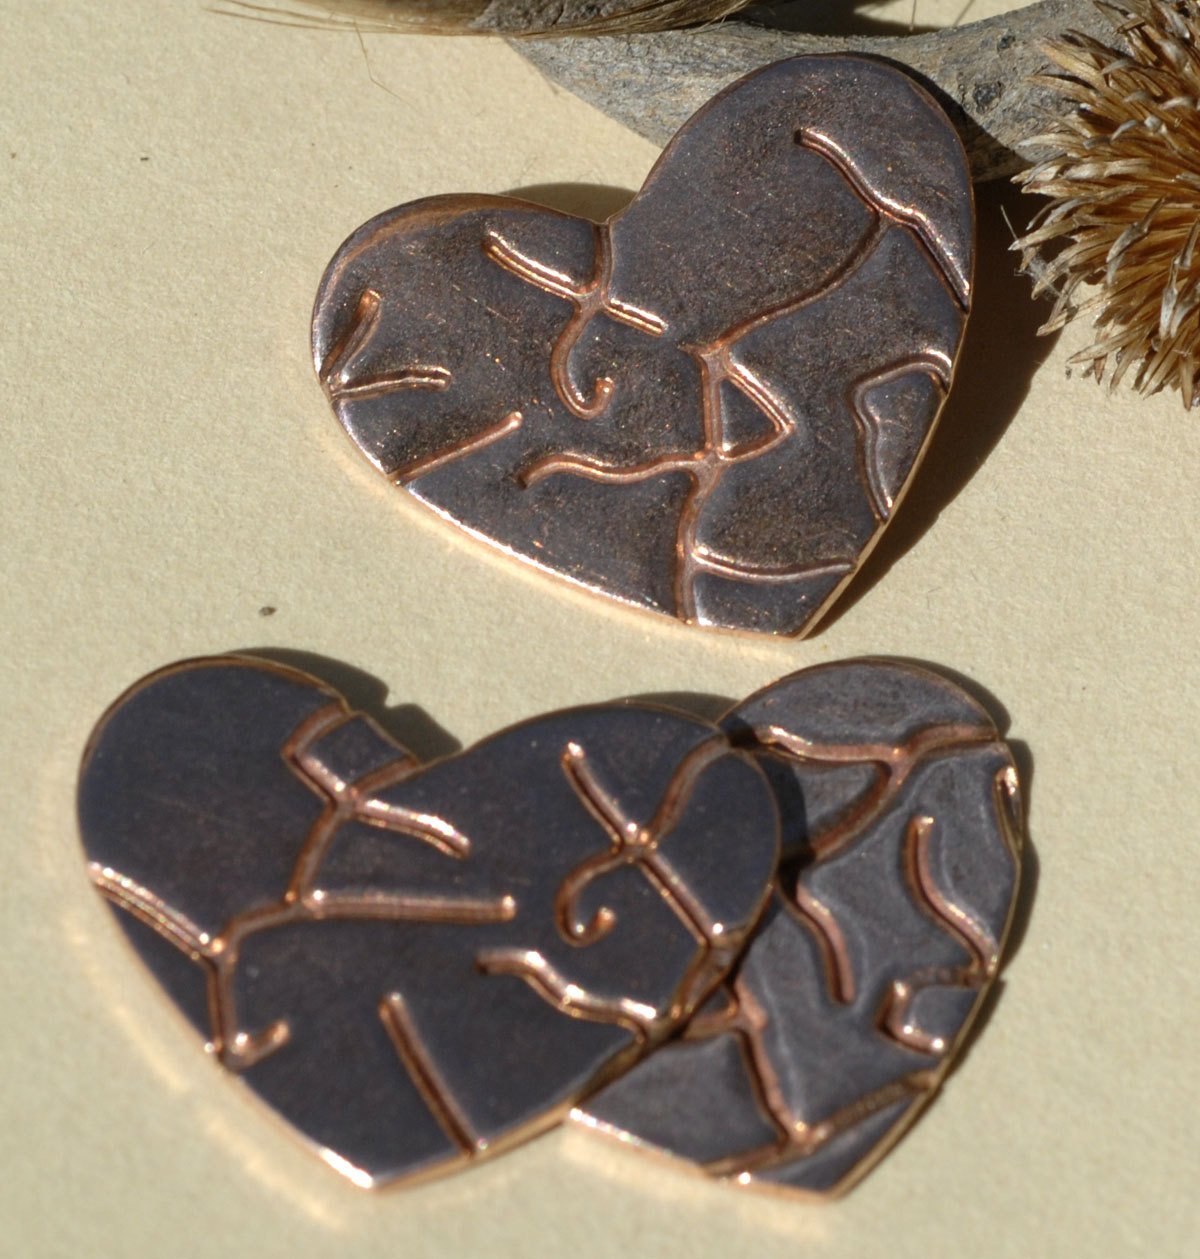 Heart Blank 24mm x 20mm 22g Cutout for Enameling Stamping Texturing - Metalworking Supply 4 Pieces